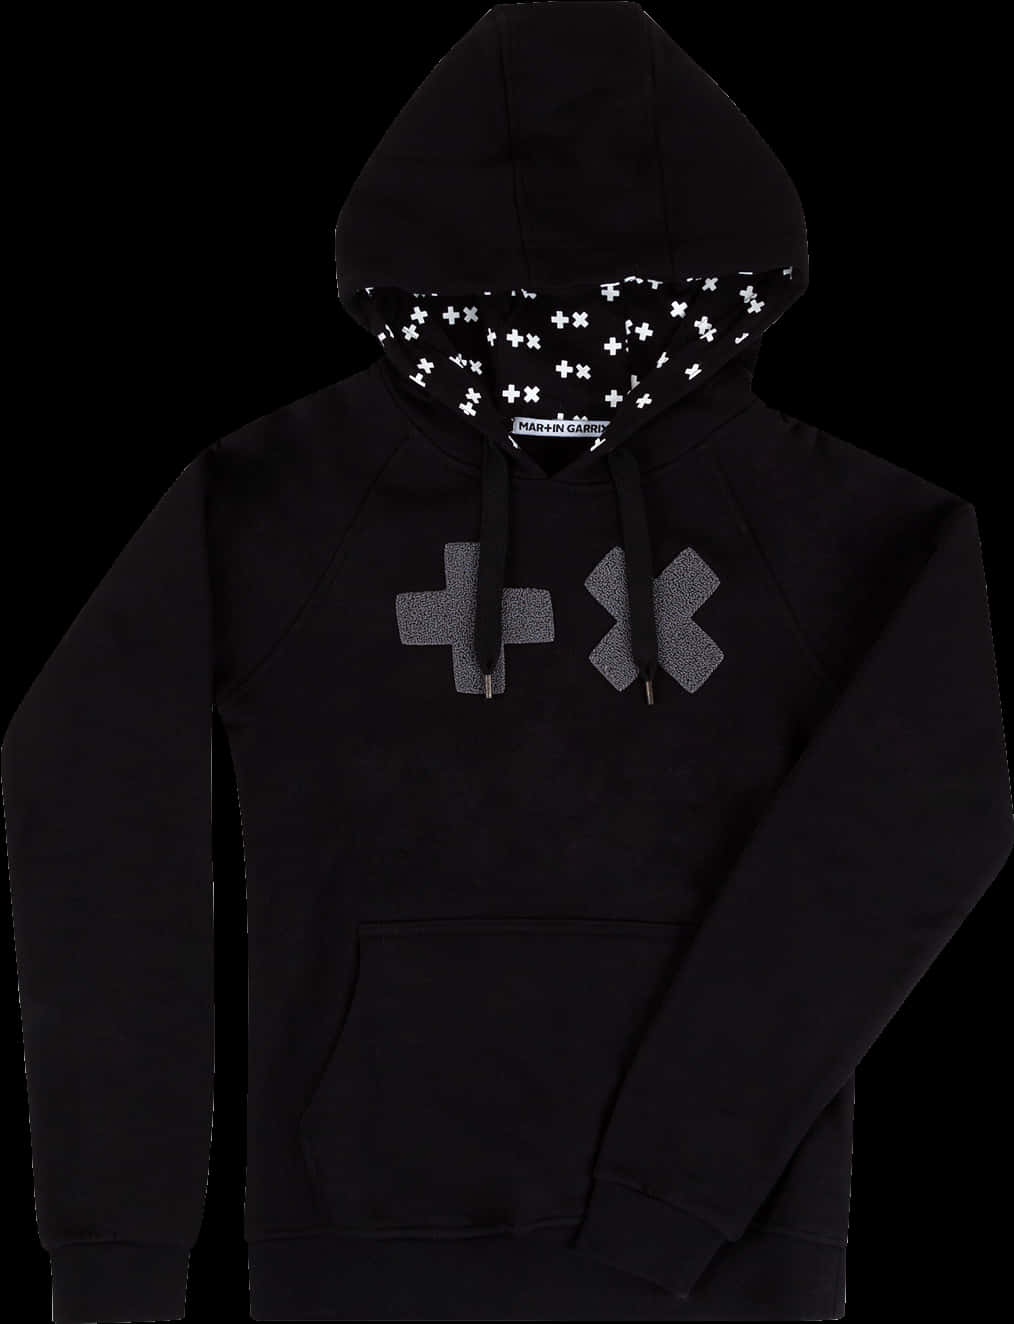 Black Hoodie With Plus And Multiplication Signs